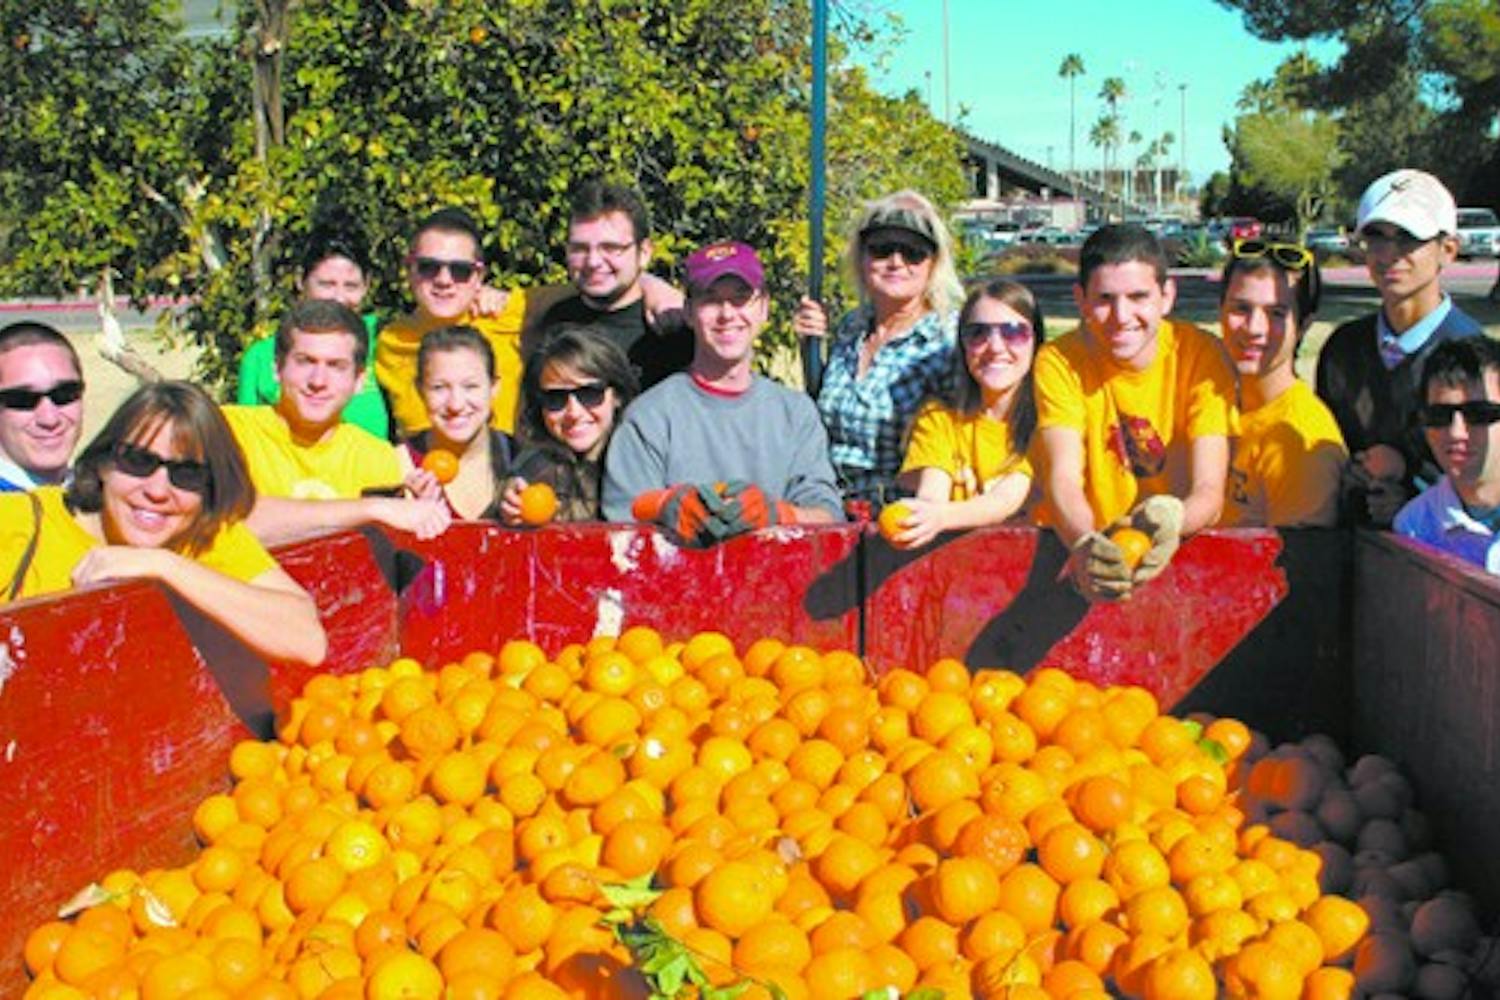 ORANGE HARVEST: Volunteers from fraternity Sigma Alpha Mu and Sun Devils for Israel picked hundreds of oranges on the Tempe campus Sunday.  Most of the oranges will be sold or donated across the Valley while the rest will be composted. (Photo by Lisa Bartoli)